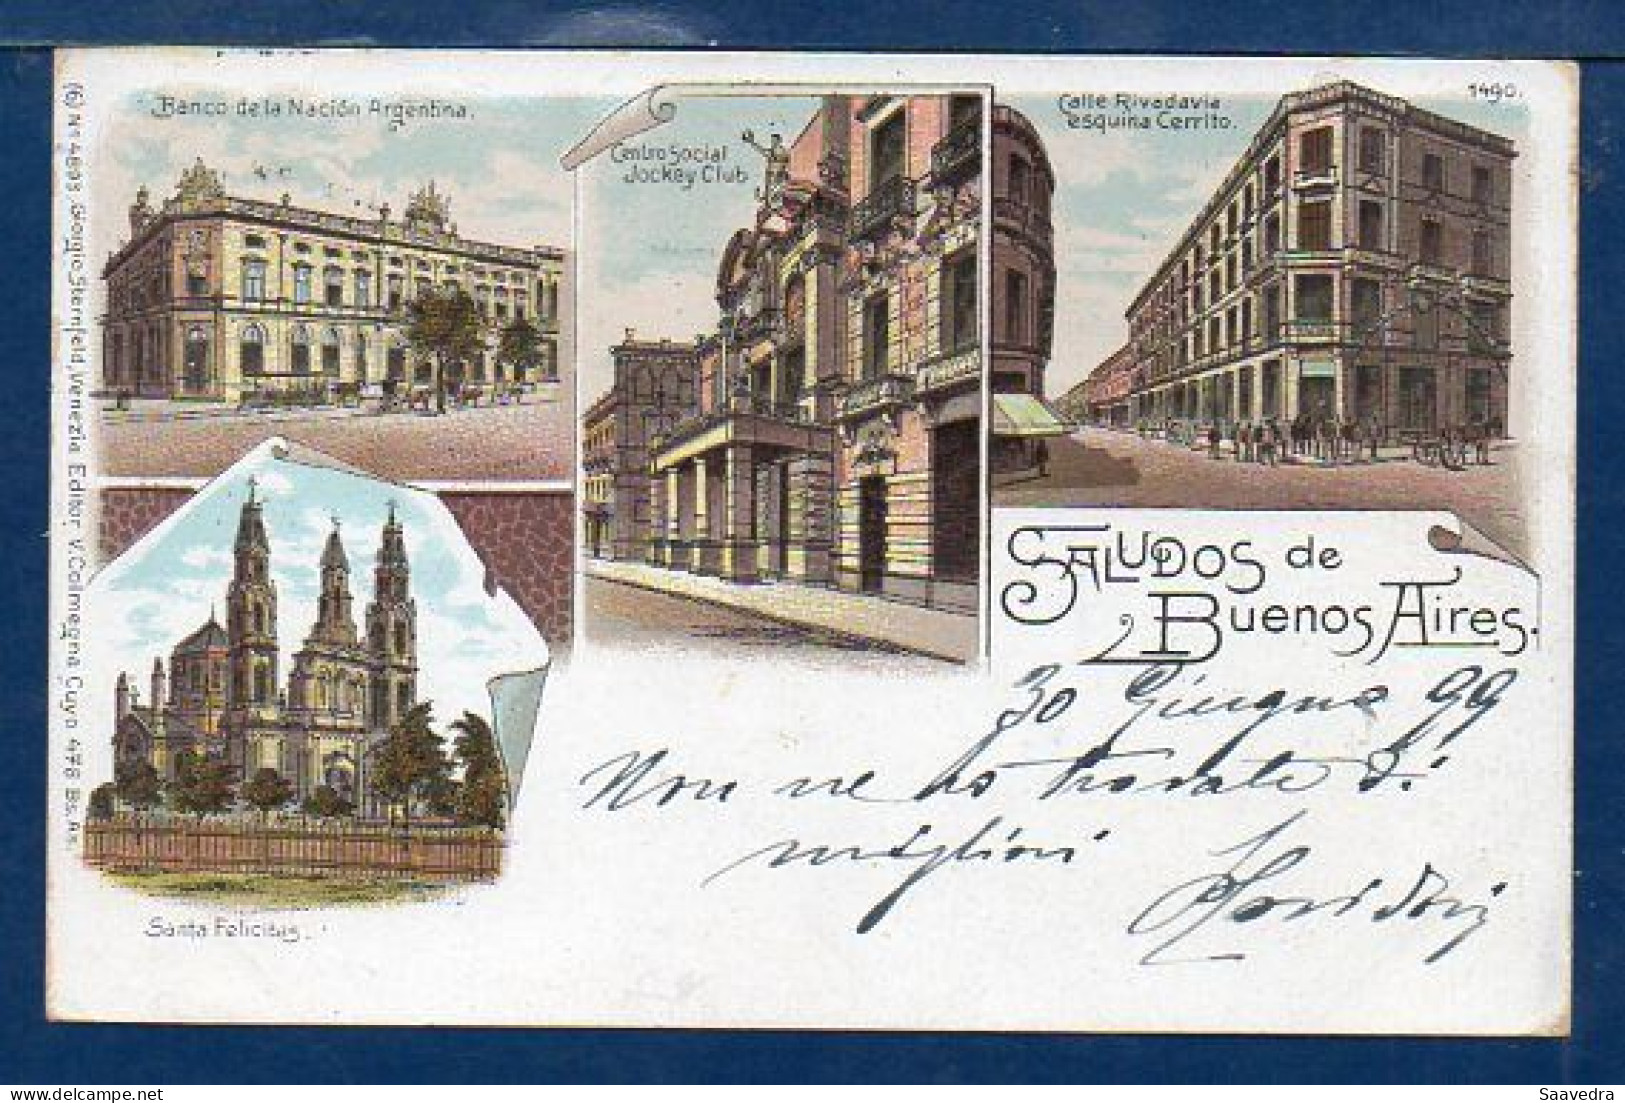 Argentina To Italy, "Gruss From Buenos Aires", 1899, Used Litho Postcard  (037) - Argentina